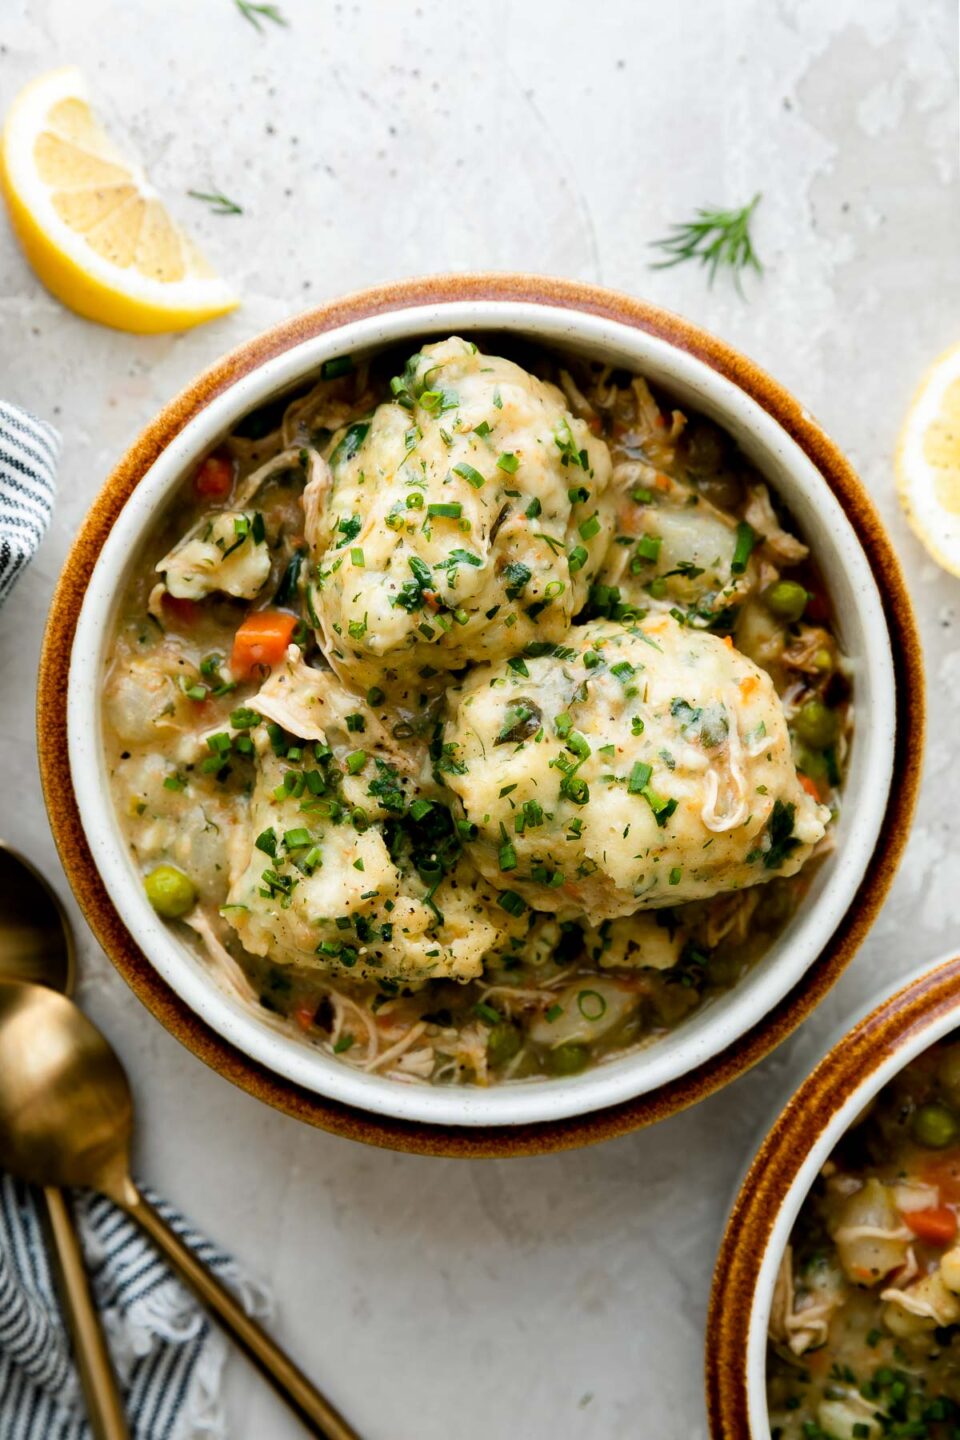 Two servings of homemade chicken and dumplings fill two brown rimmed ceramic bowls. The bowls sit atop a creamy white textured surface surrounded by lemon wedges, fresh herbs, a blue and white striped linen napkin and two gold spoons.